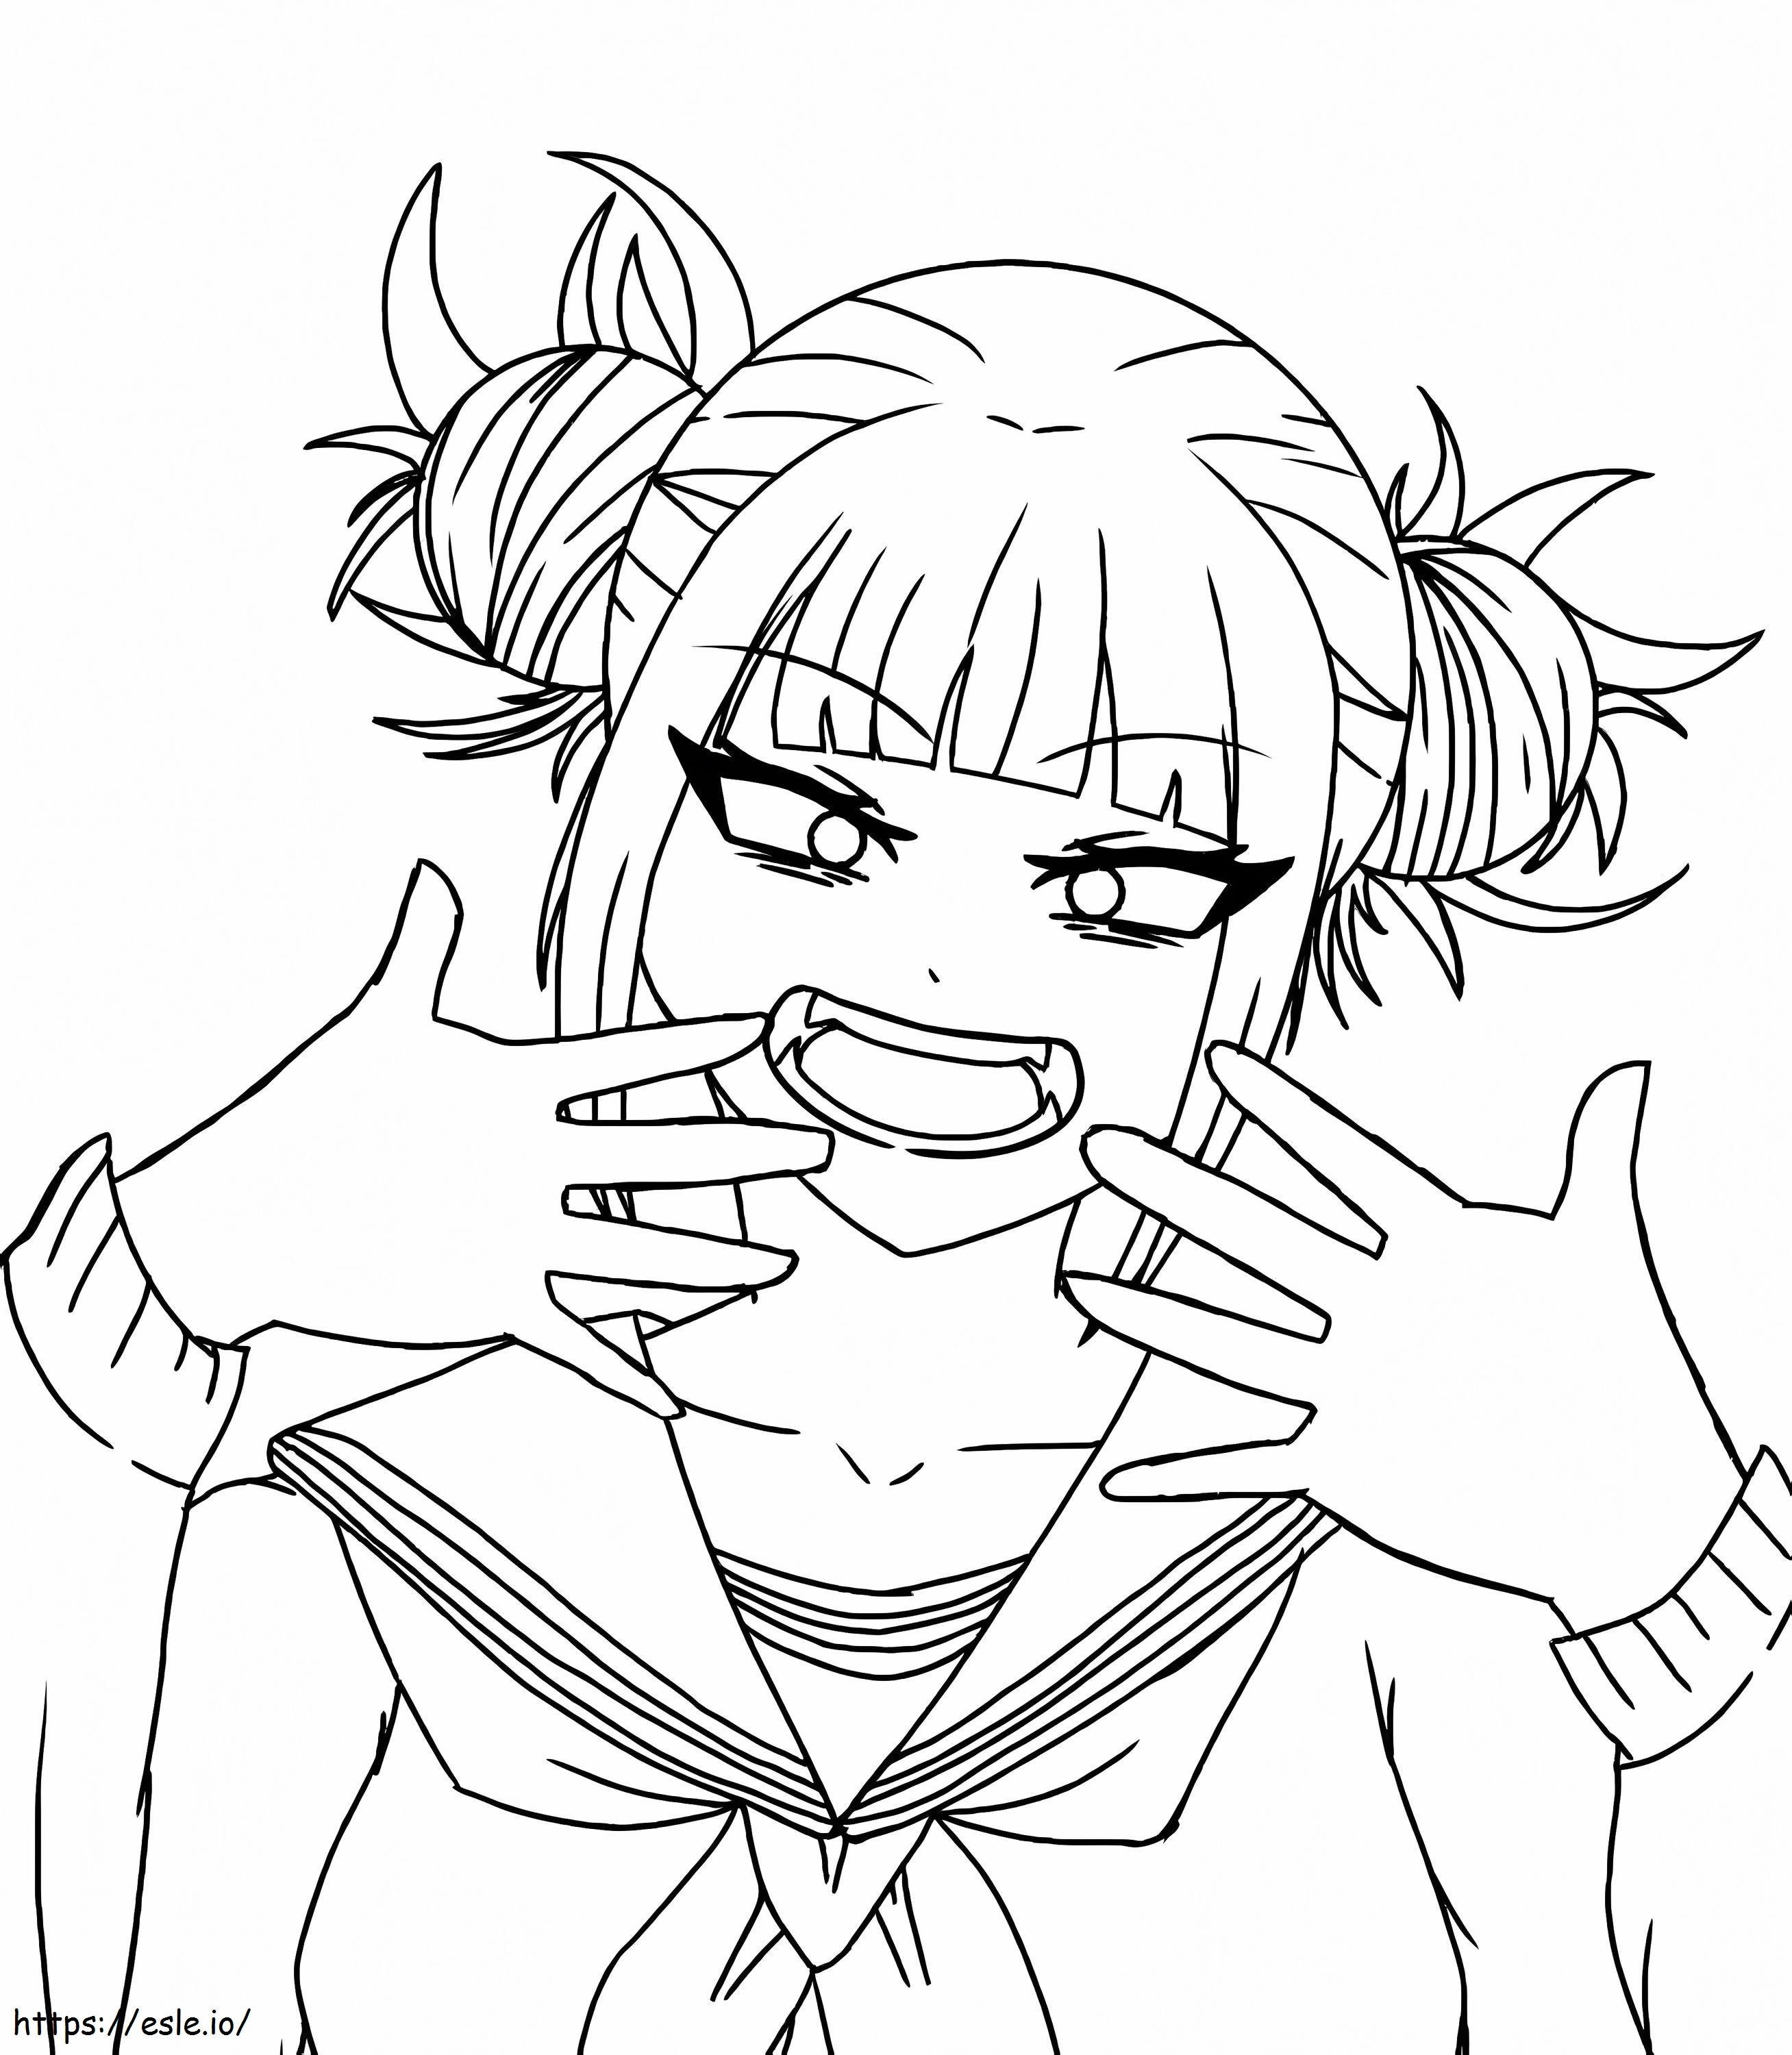 Toga Himiko 5 coloring page